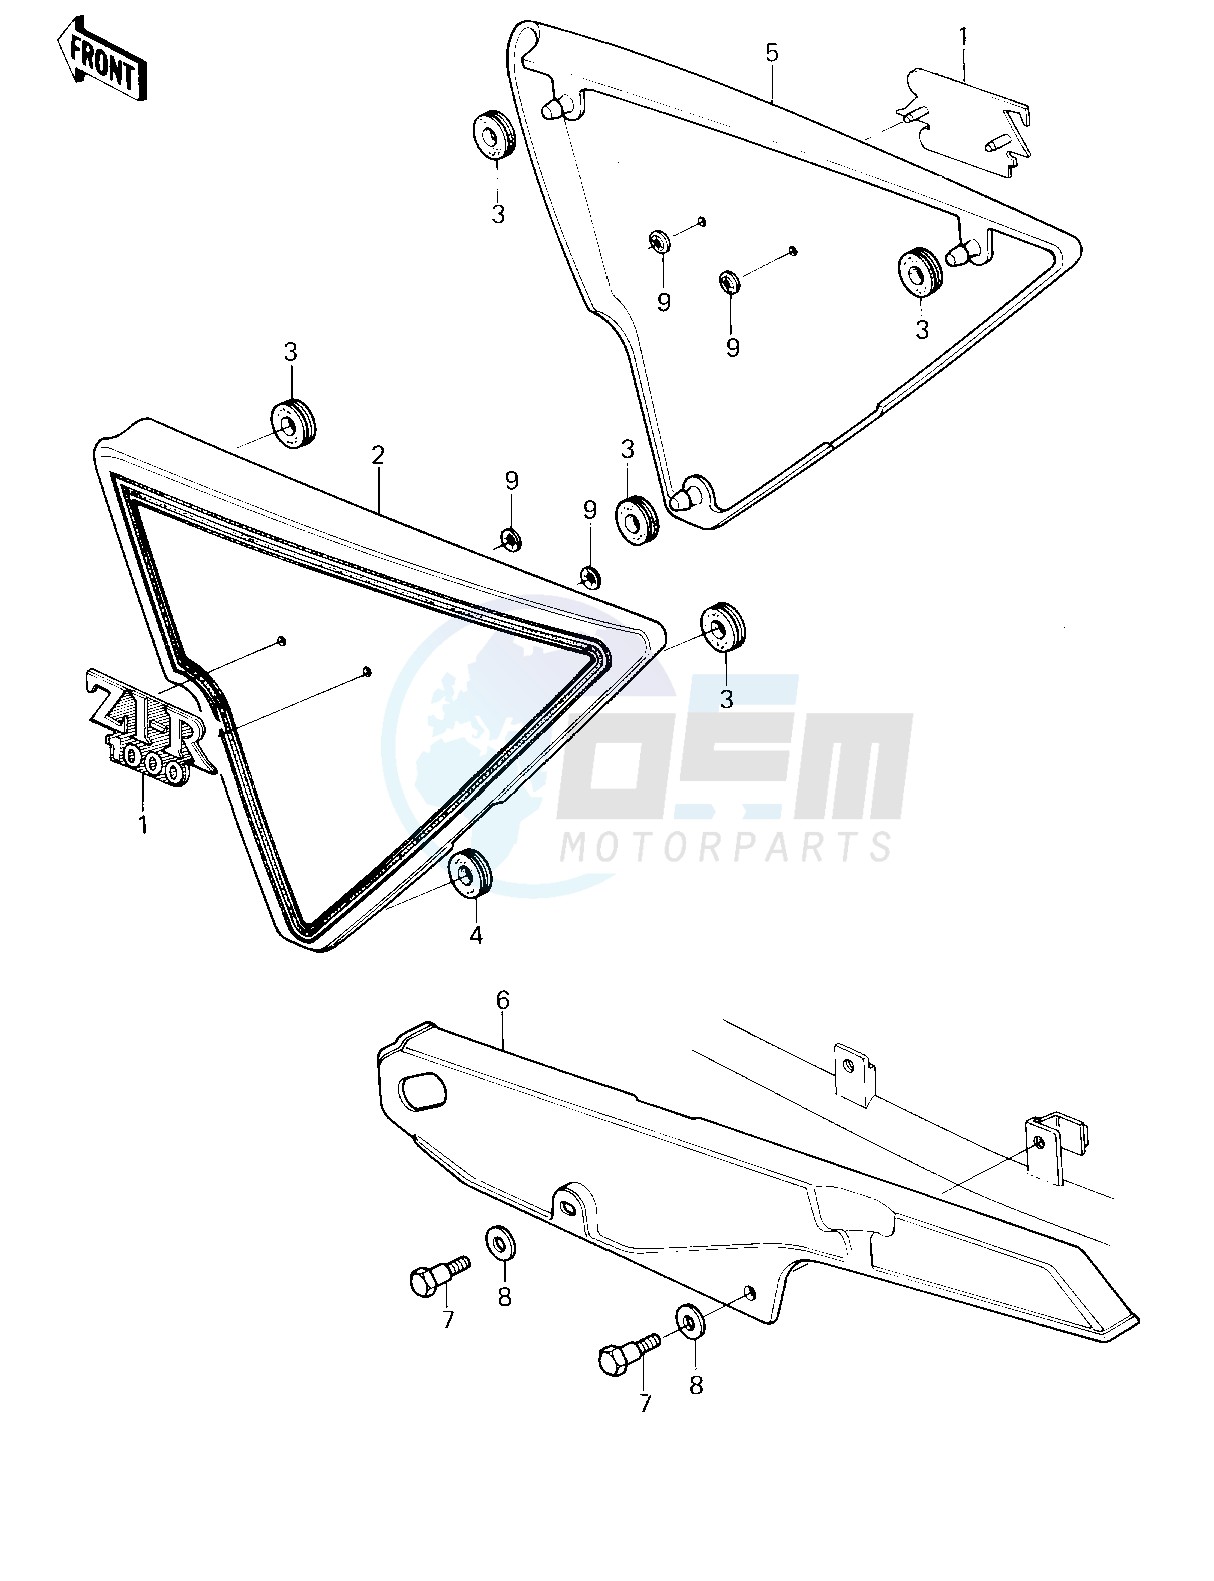 SIDE COVERS_CHAIN COVER -- 80 D3- - blueprint